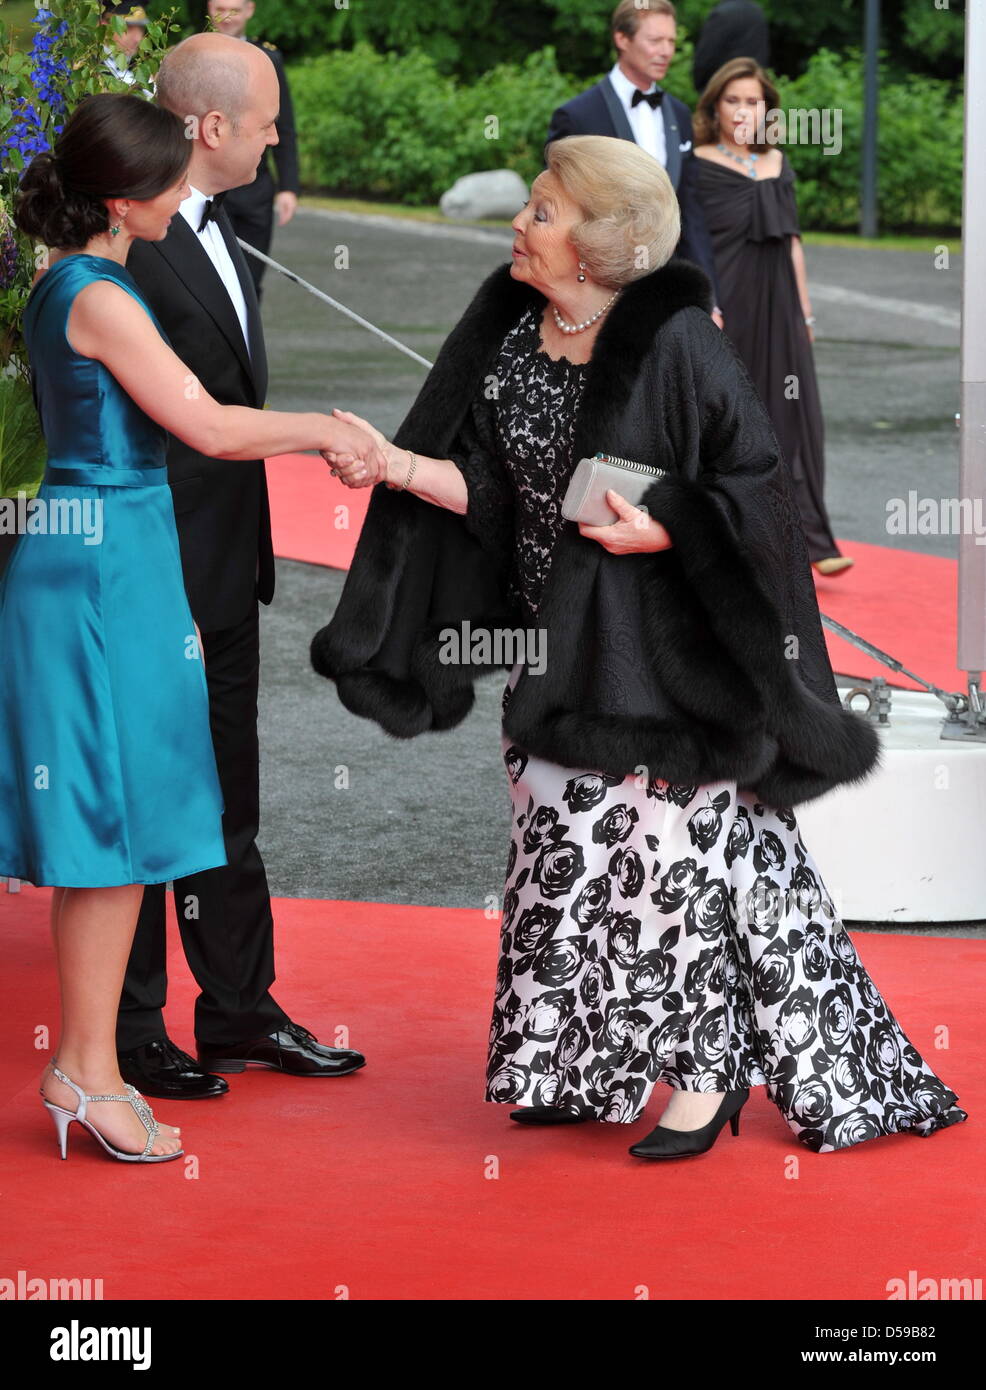 Queen Beatrix of the Netherlands (R) is welcomed by Swedish Prime Minister Fredrik Reinfeldt and his wife Filippa for the goverment dinner held at the Eric Ericson Hall on Skeppsholmen, one of the islands of Stockholm, on the occasion of the wedding of Crown Princess Victoria of Sweden and Daniel Westling in Stockholm, Sweden, 18 June 2010. The royal wedding ceremony of Crown Princ Stock Photo